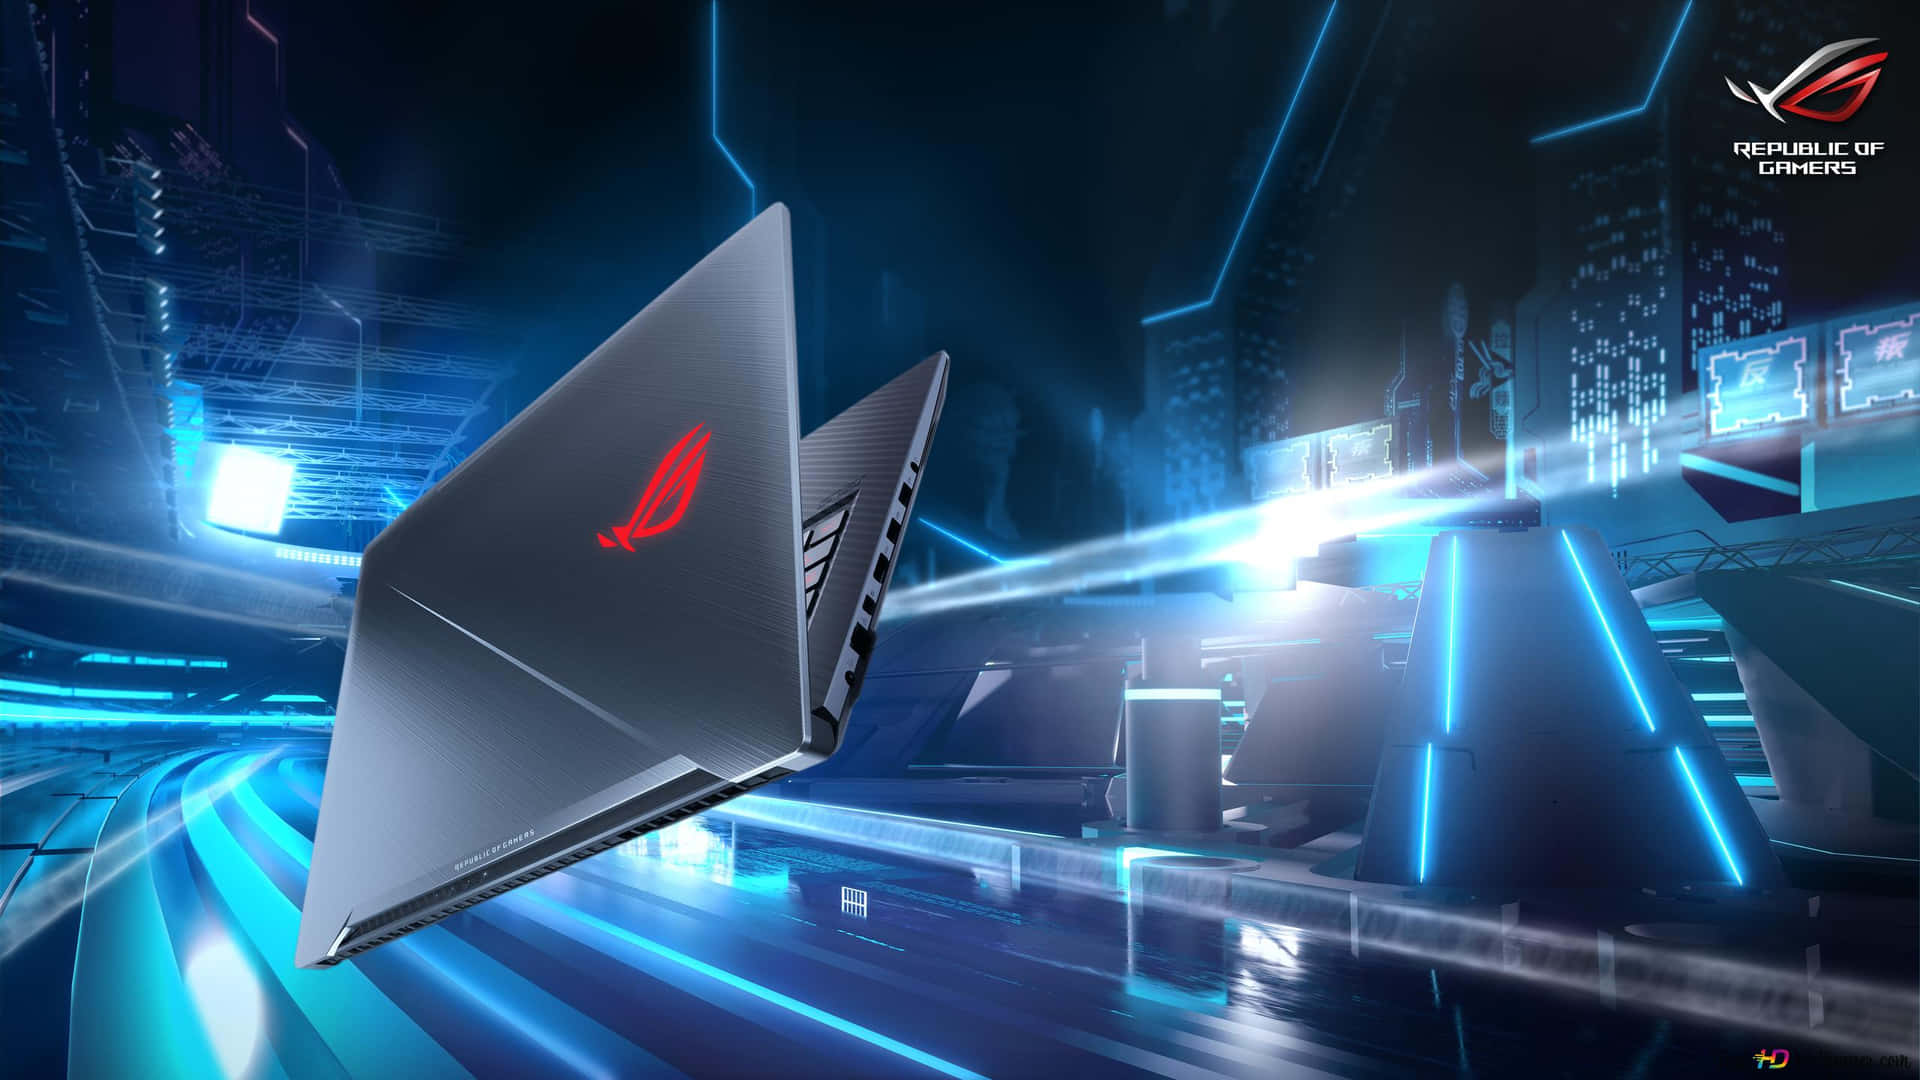 Experience the gaming power of Asus ROG